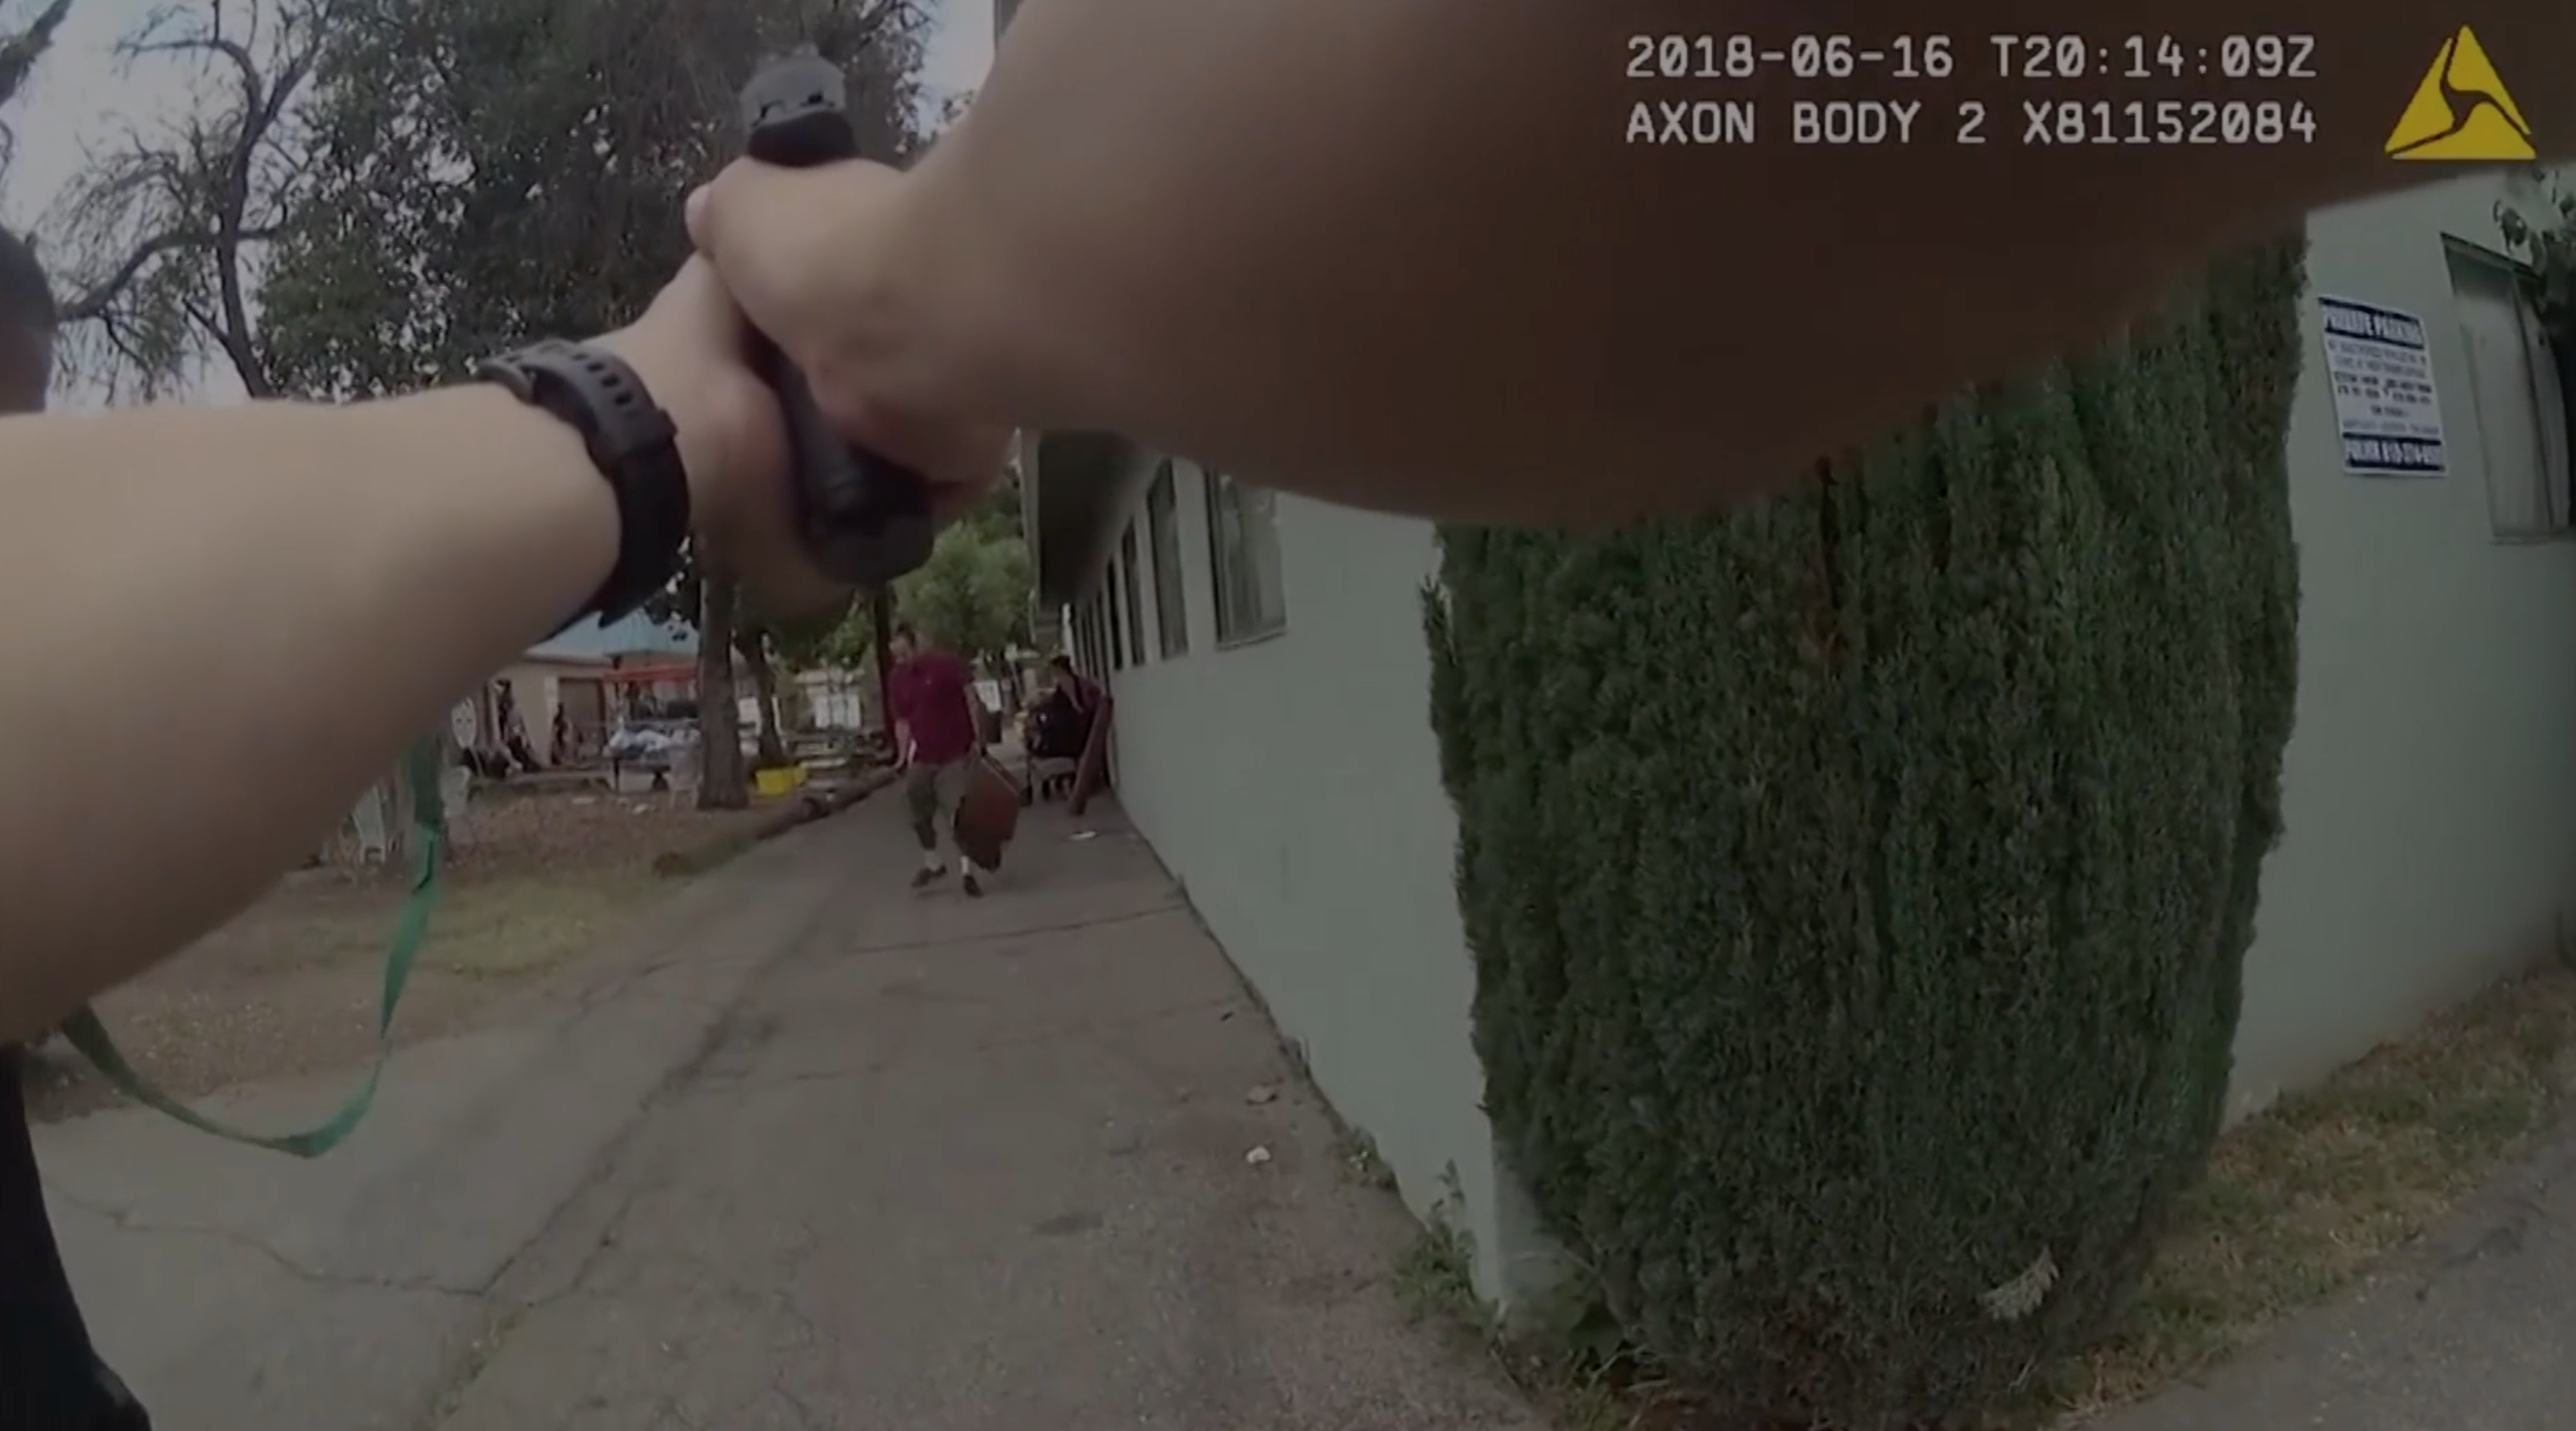 Bodycam footage shows the LAPD face off with Guillermo Perez as he wields a knife.